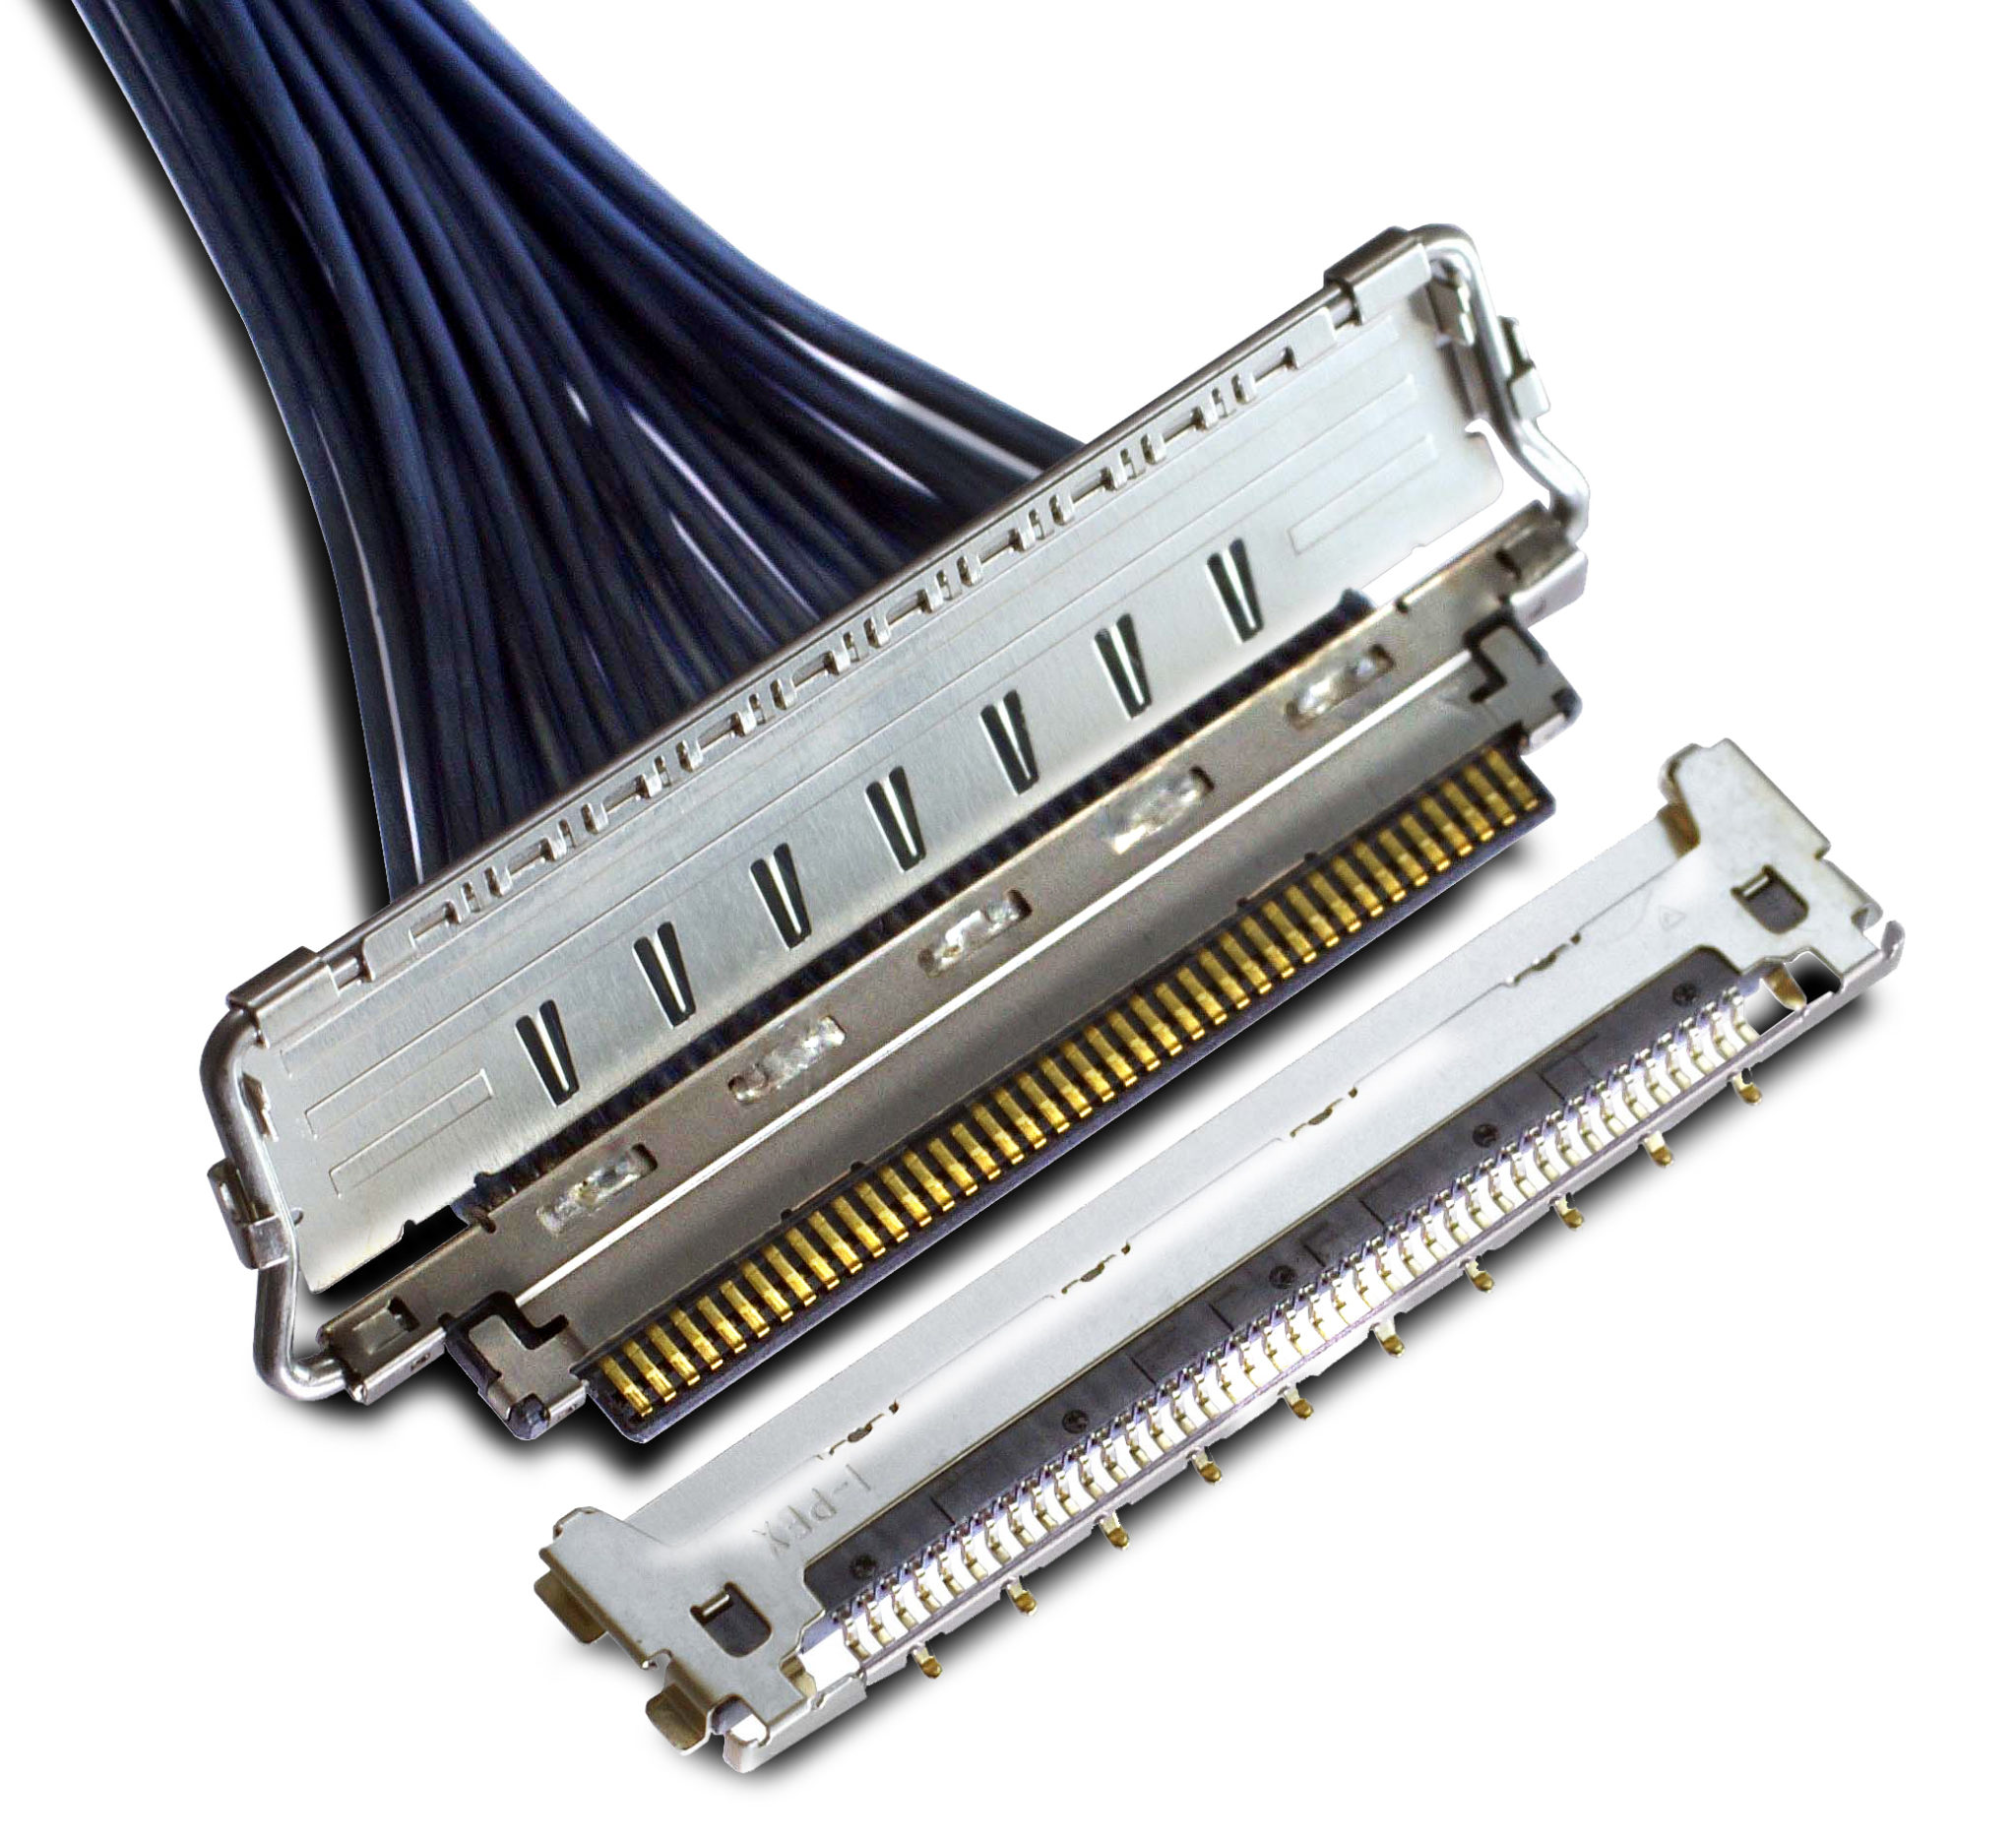 cable connectors from I-PEX